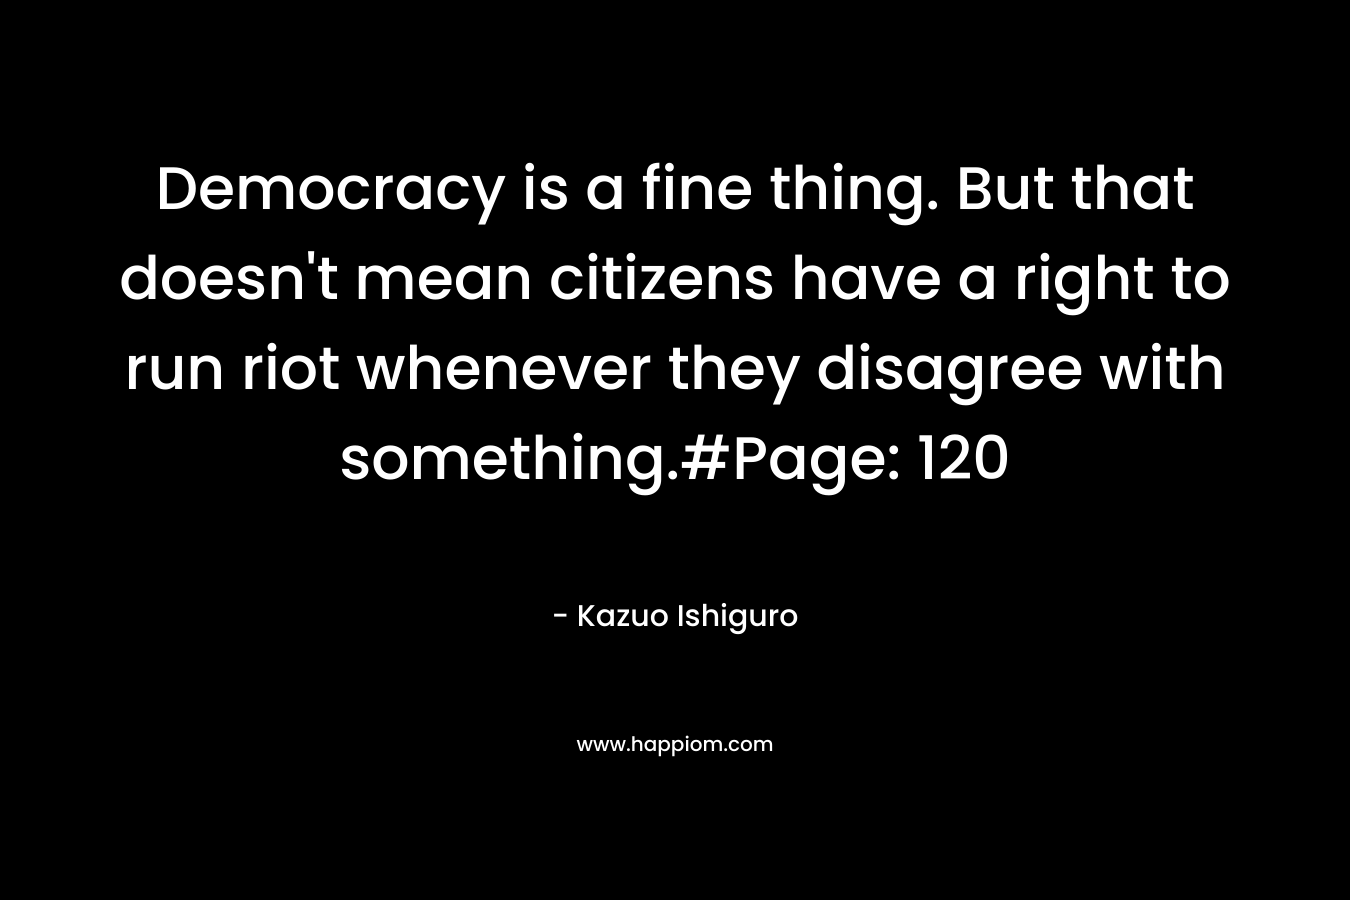 Democracy is a fine thing. But that doesn’t mean citizens have a right to run riot whenever they disagree with something.#Page: 120 – Kazuo Ishiguro